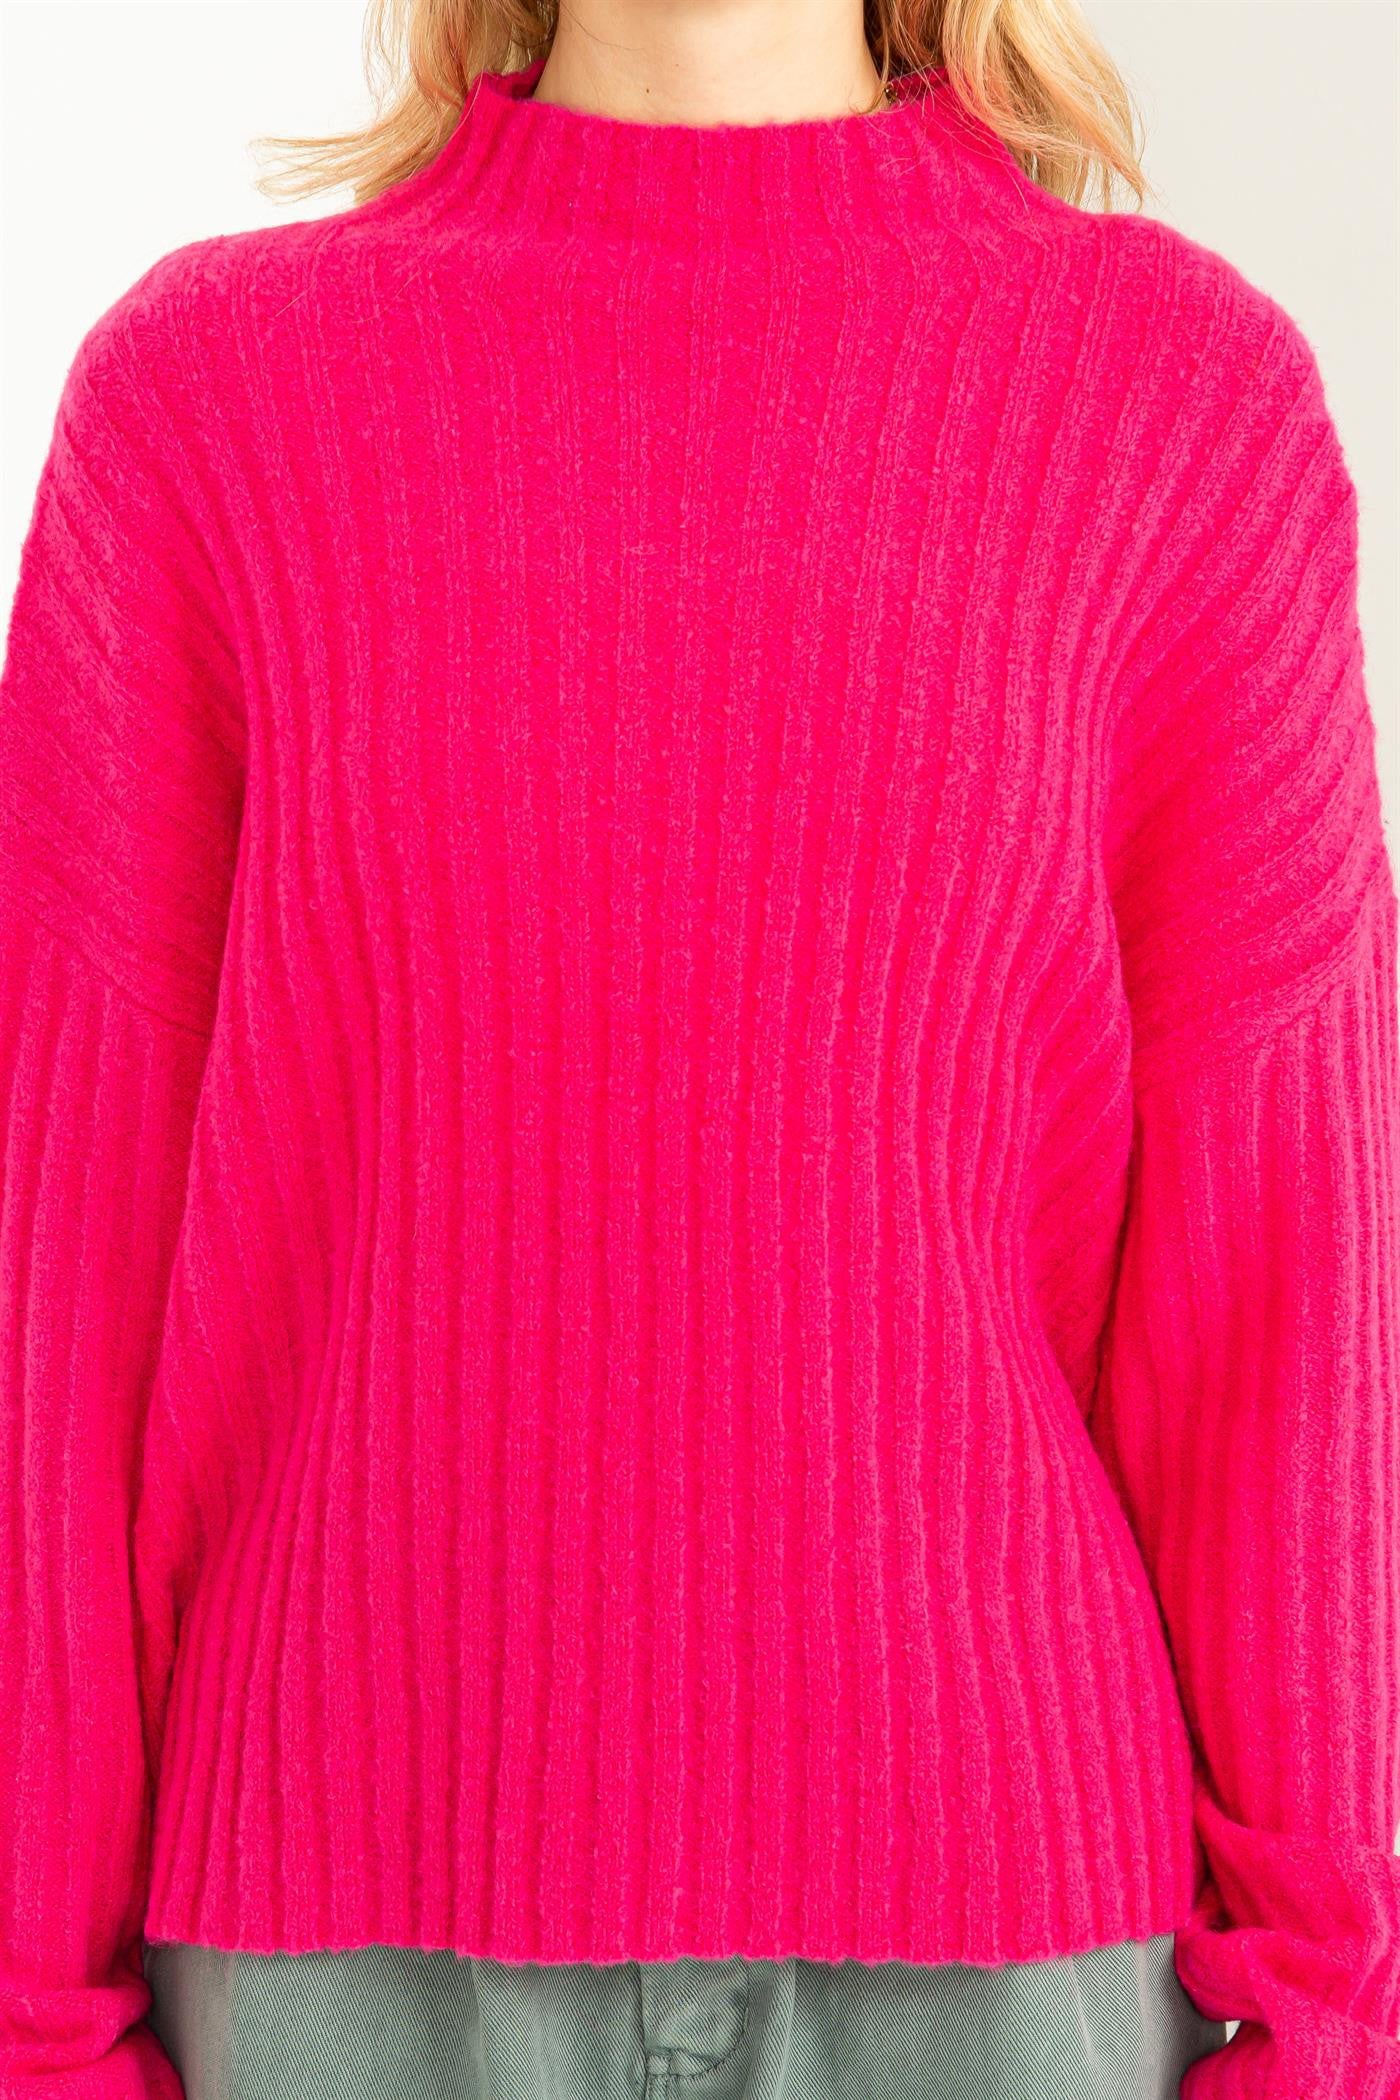 RIBBED KNIT SWEATER IN RASPERRY